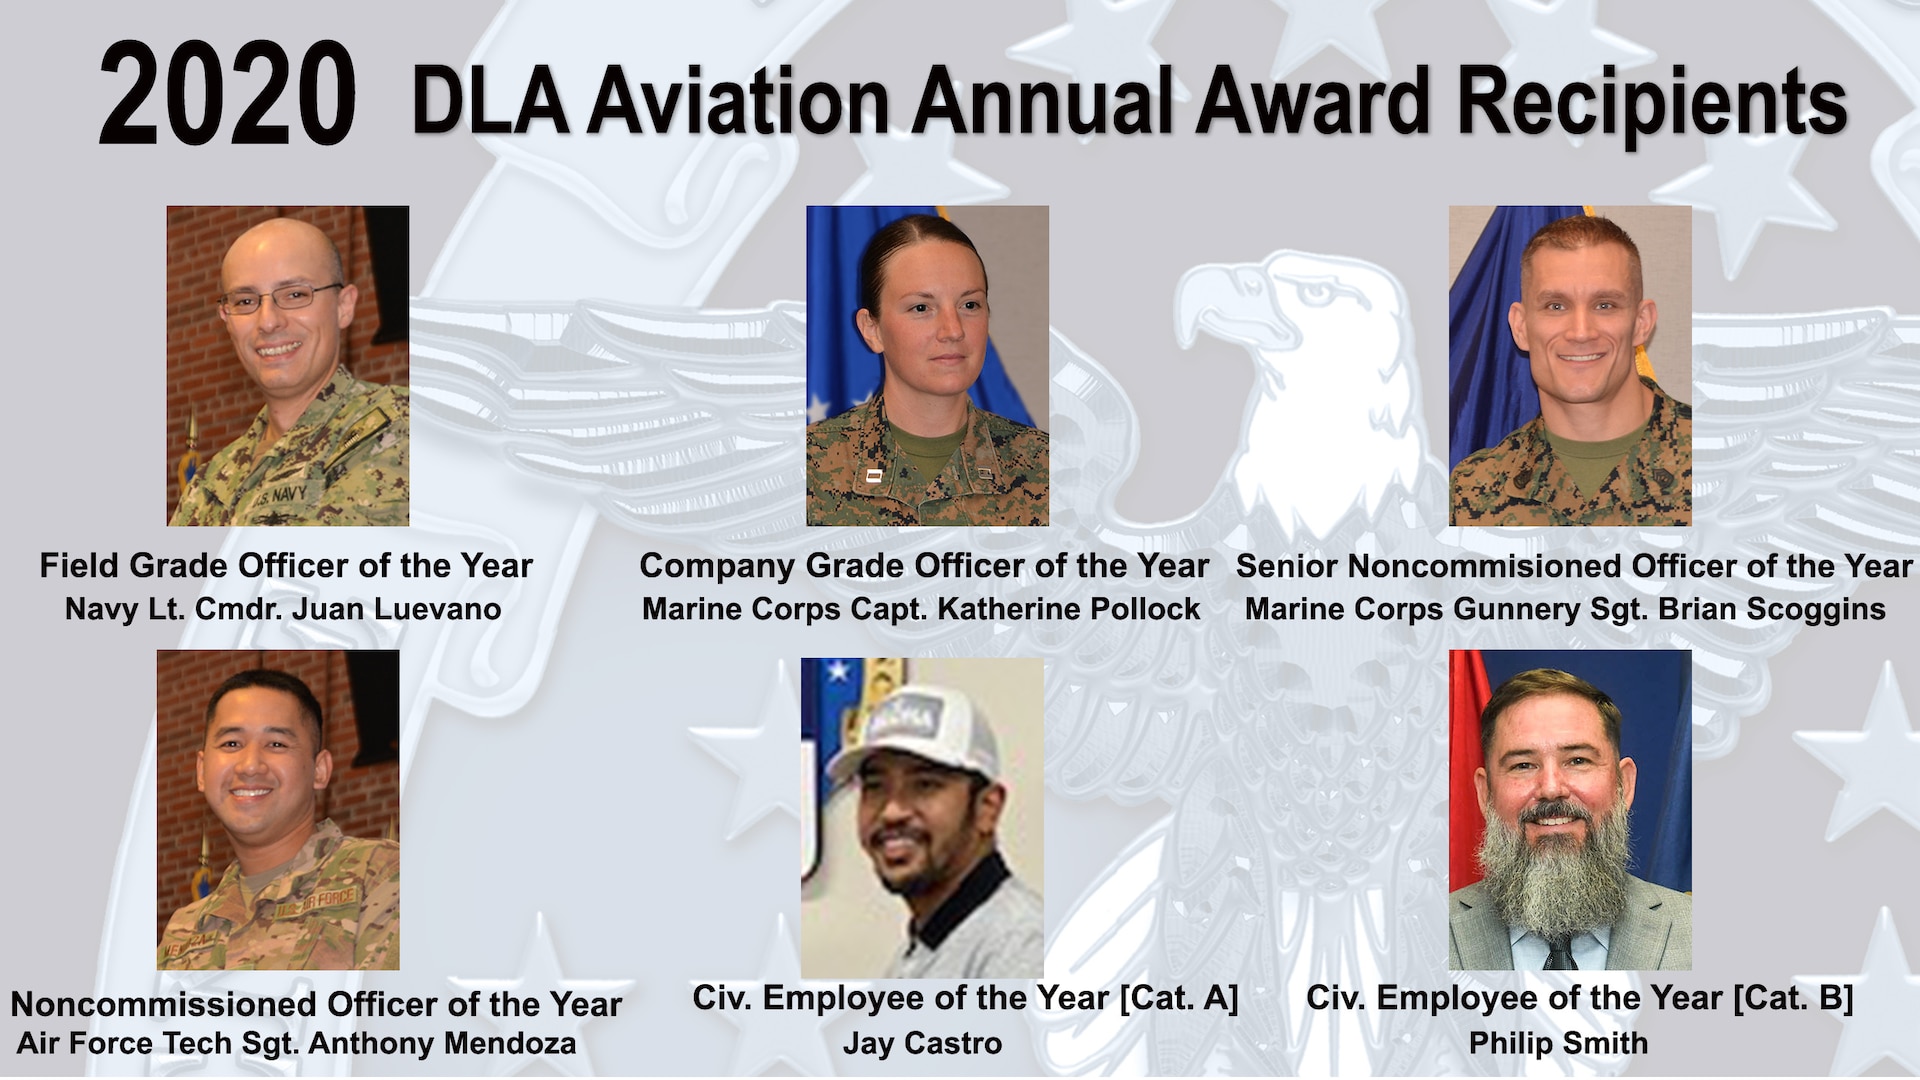 DLA Aviation awards ceremony recognizes outstanding employees